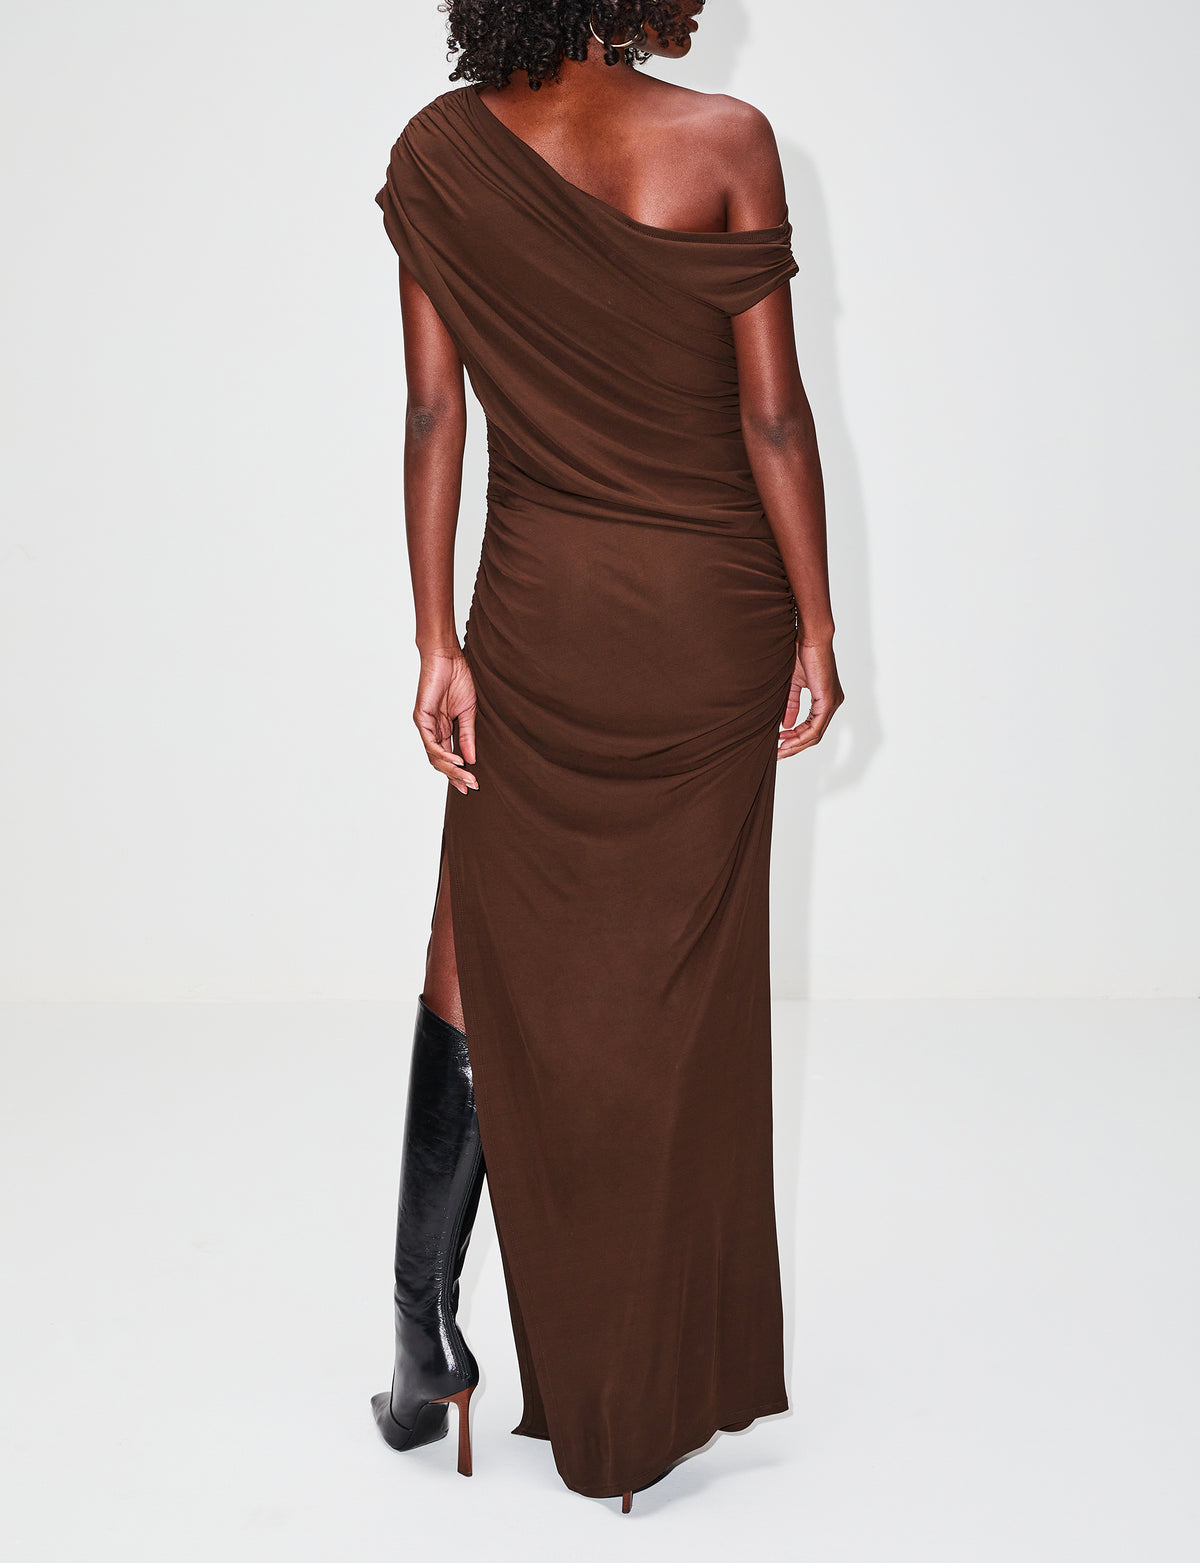 view 4 - One Shoulder Ruched Maxi Dress